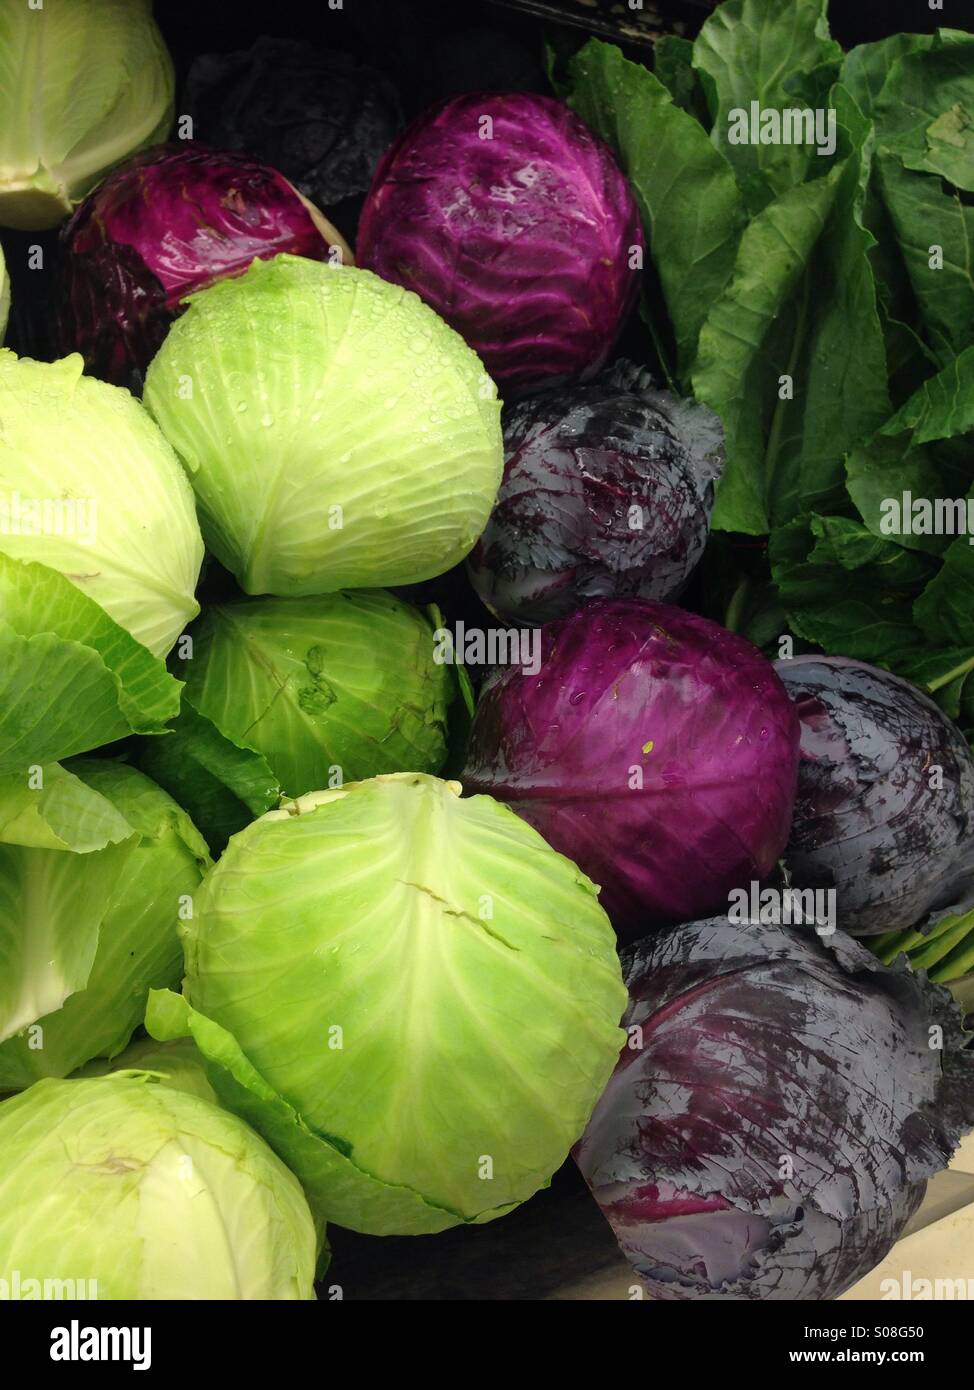 Green and Red cabbage Stock Photo